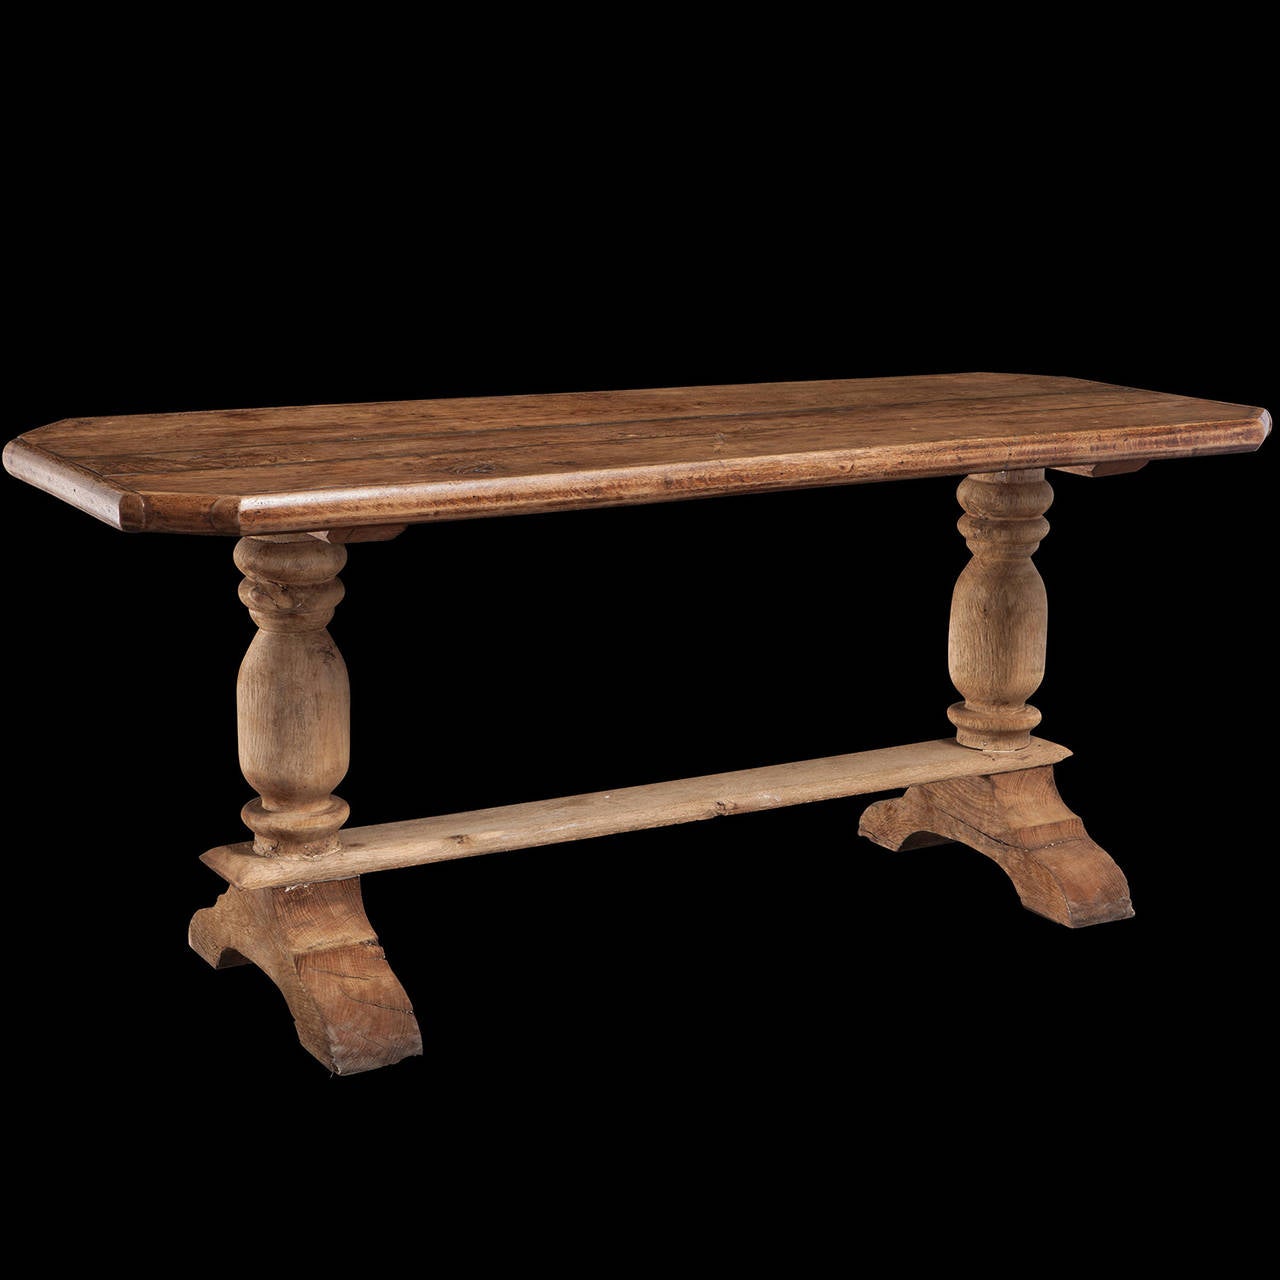 Three plank top with turned legs and trestle base.